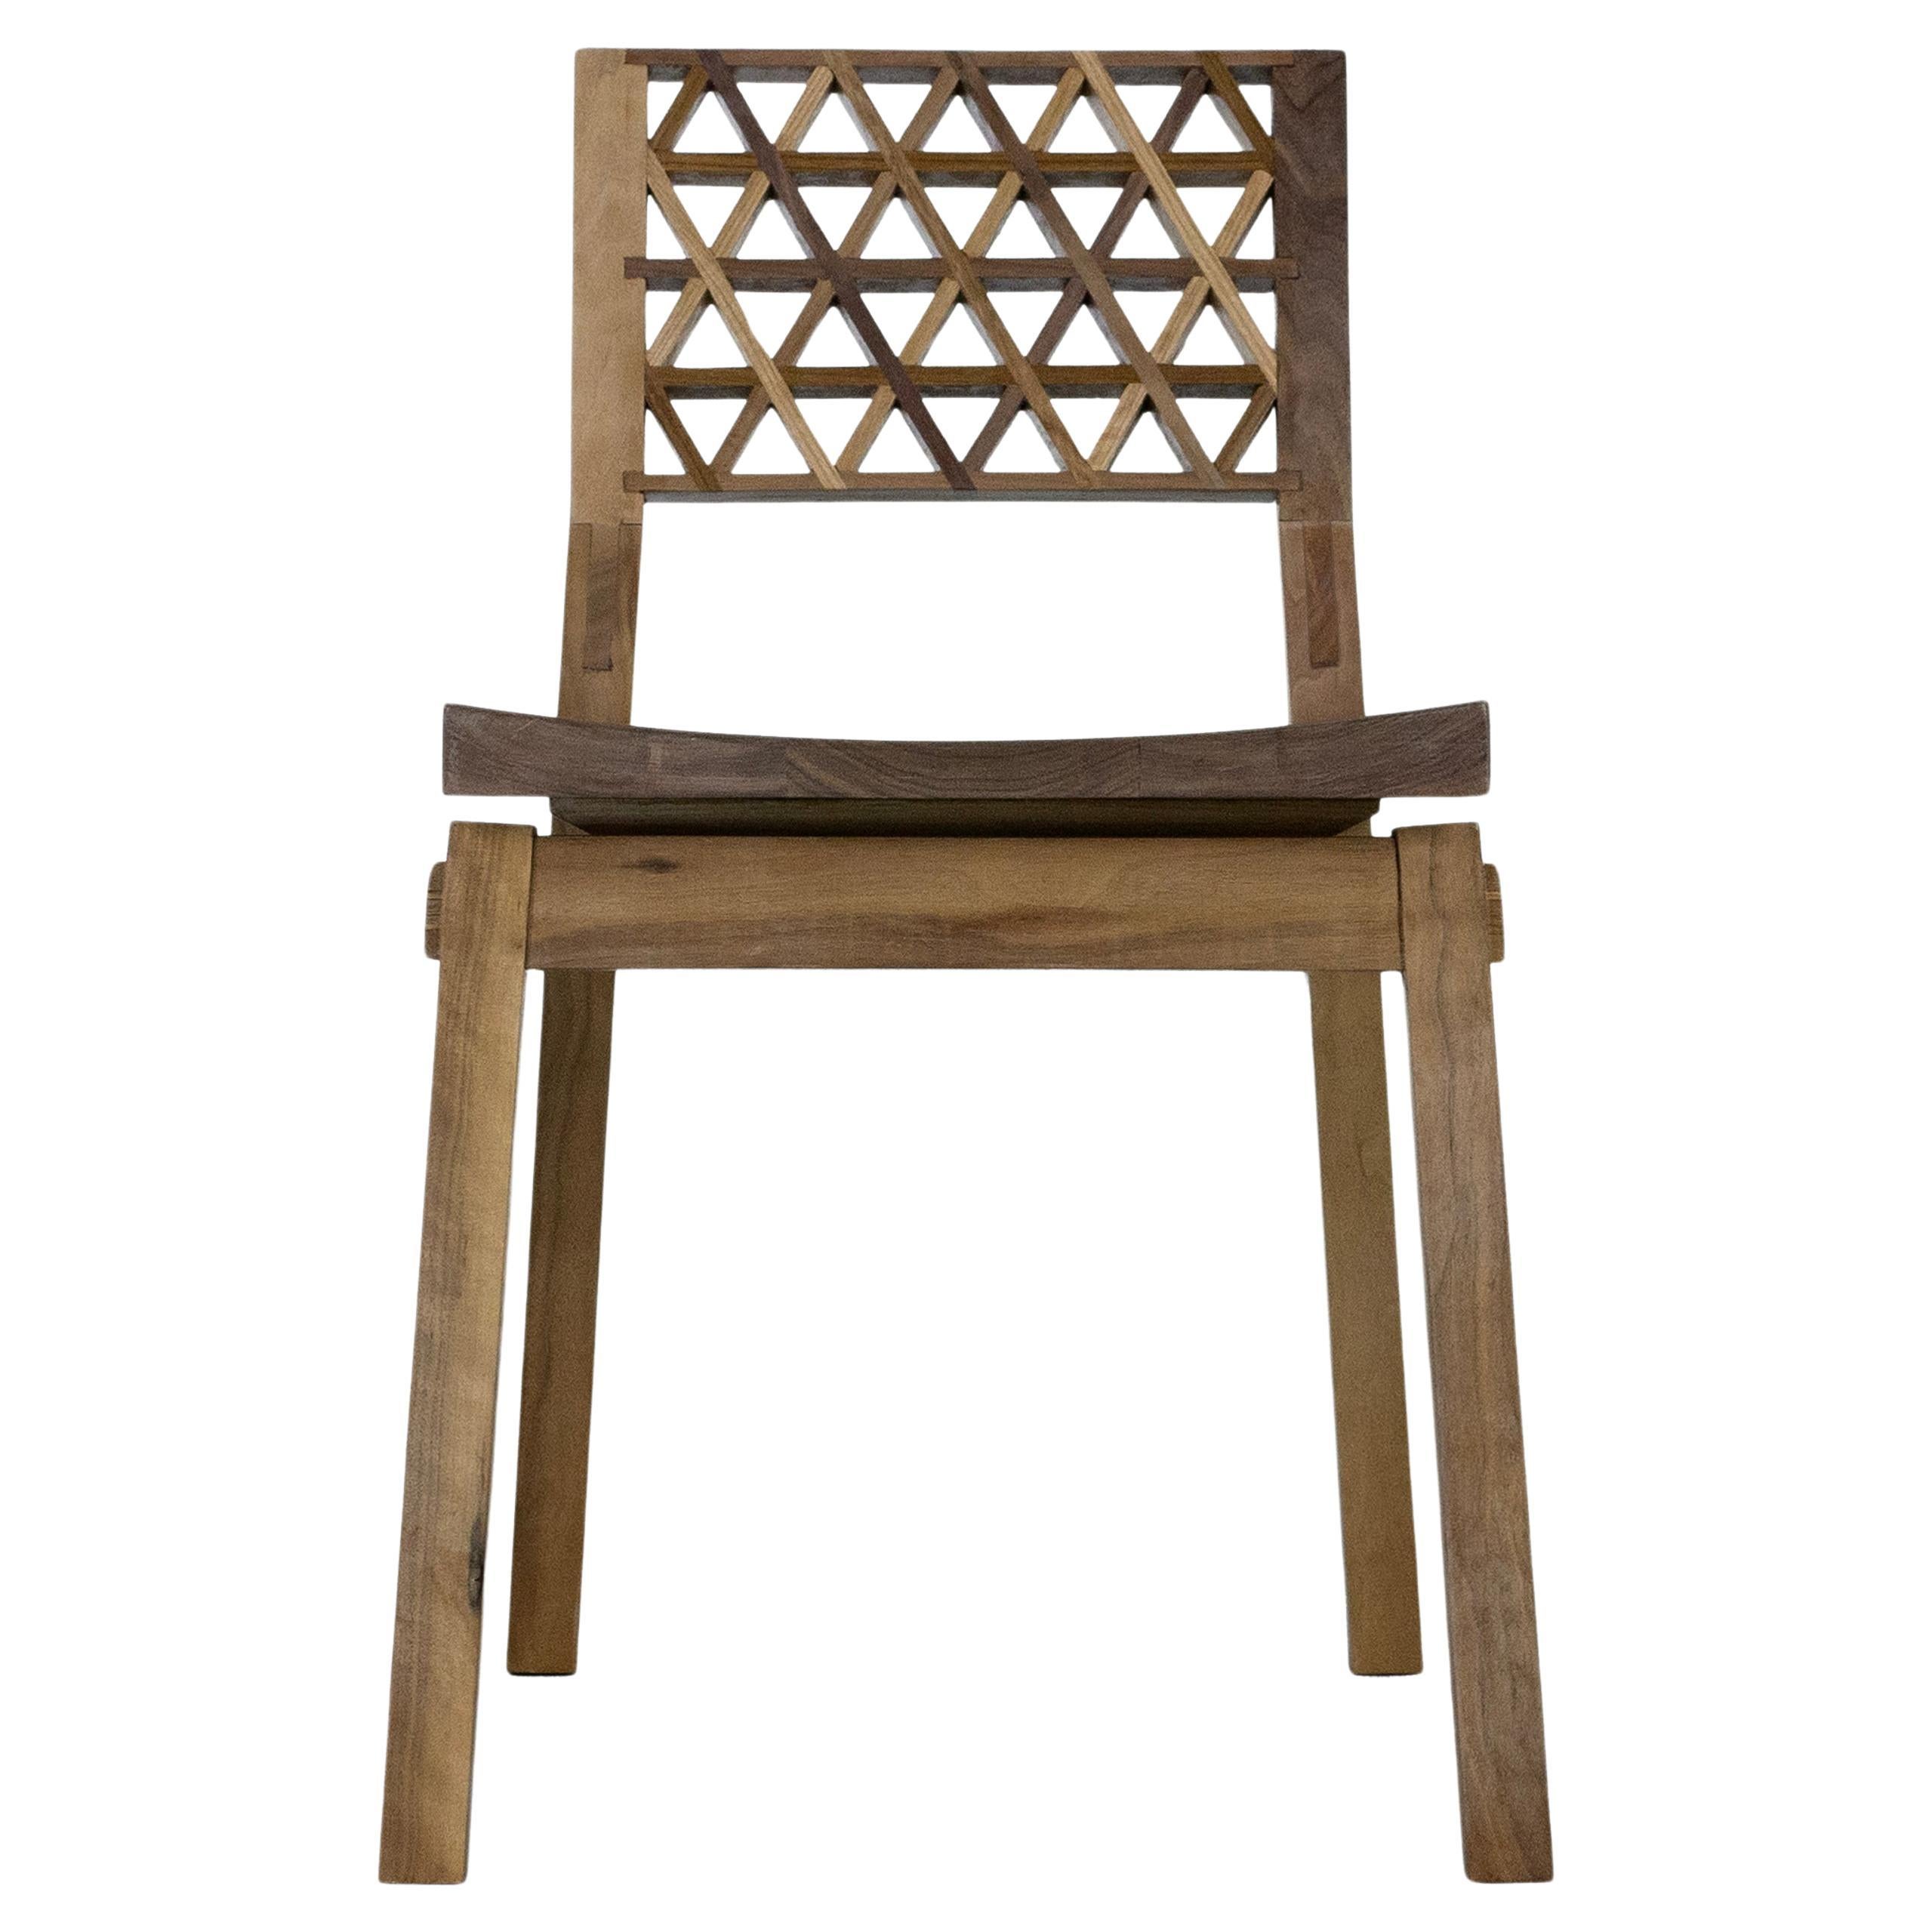 SIDE CHAIR in solid black walnut with Japanese Kumiko patterned backrest For Sale